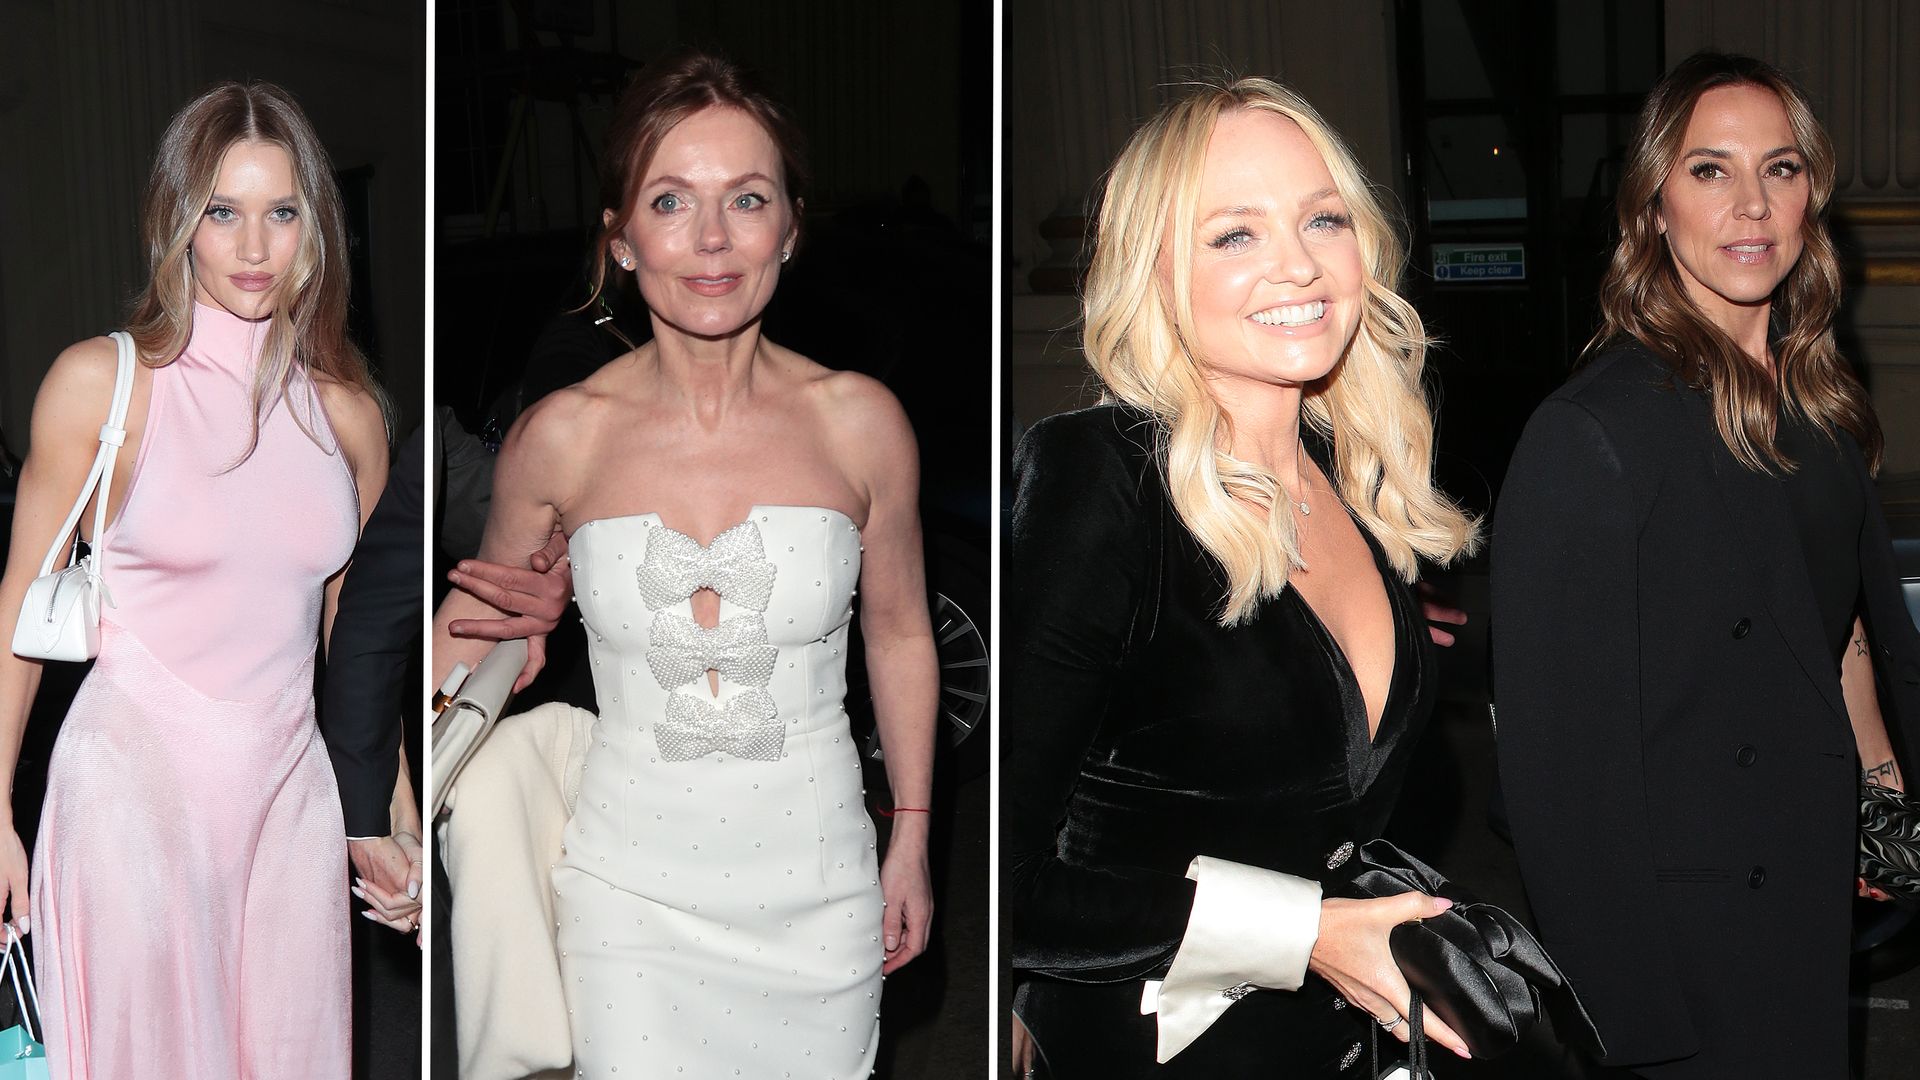 Geri Halliwell and Rosie Huntington-Whiteley lead Victoria Beckham's star-studded birthday bash – all the guests